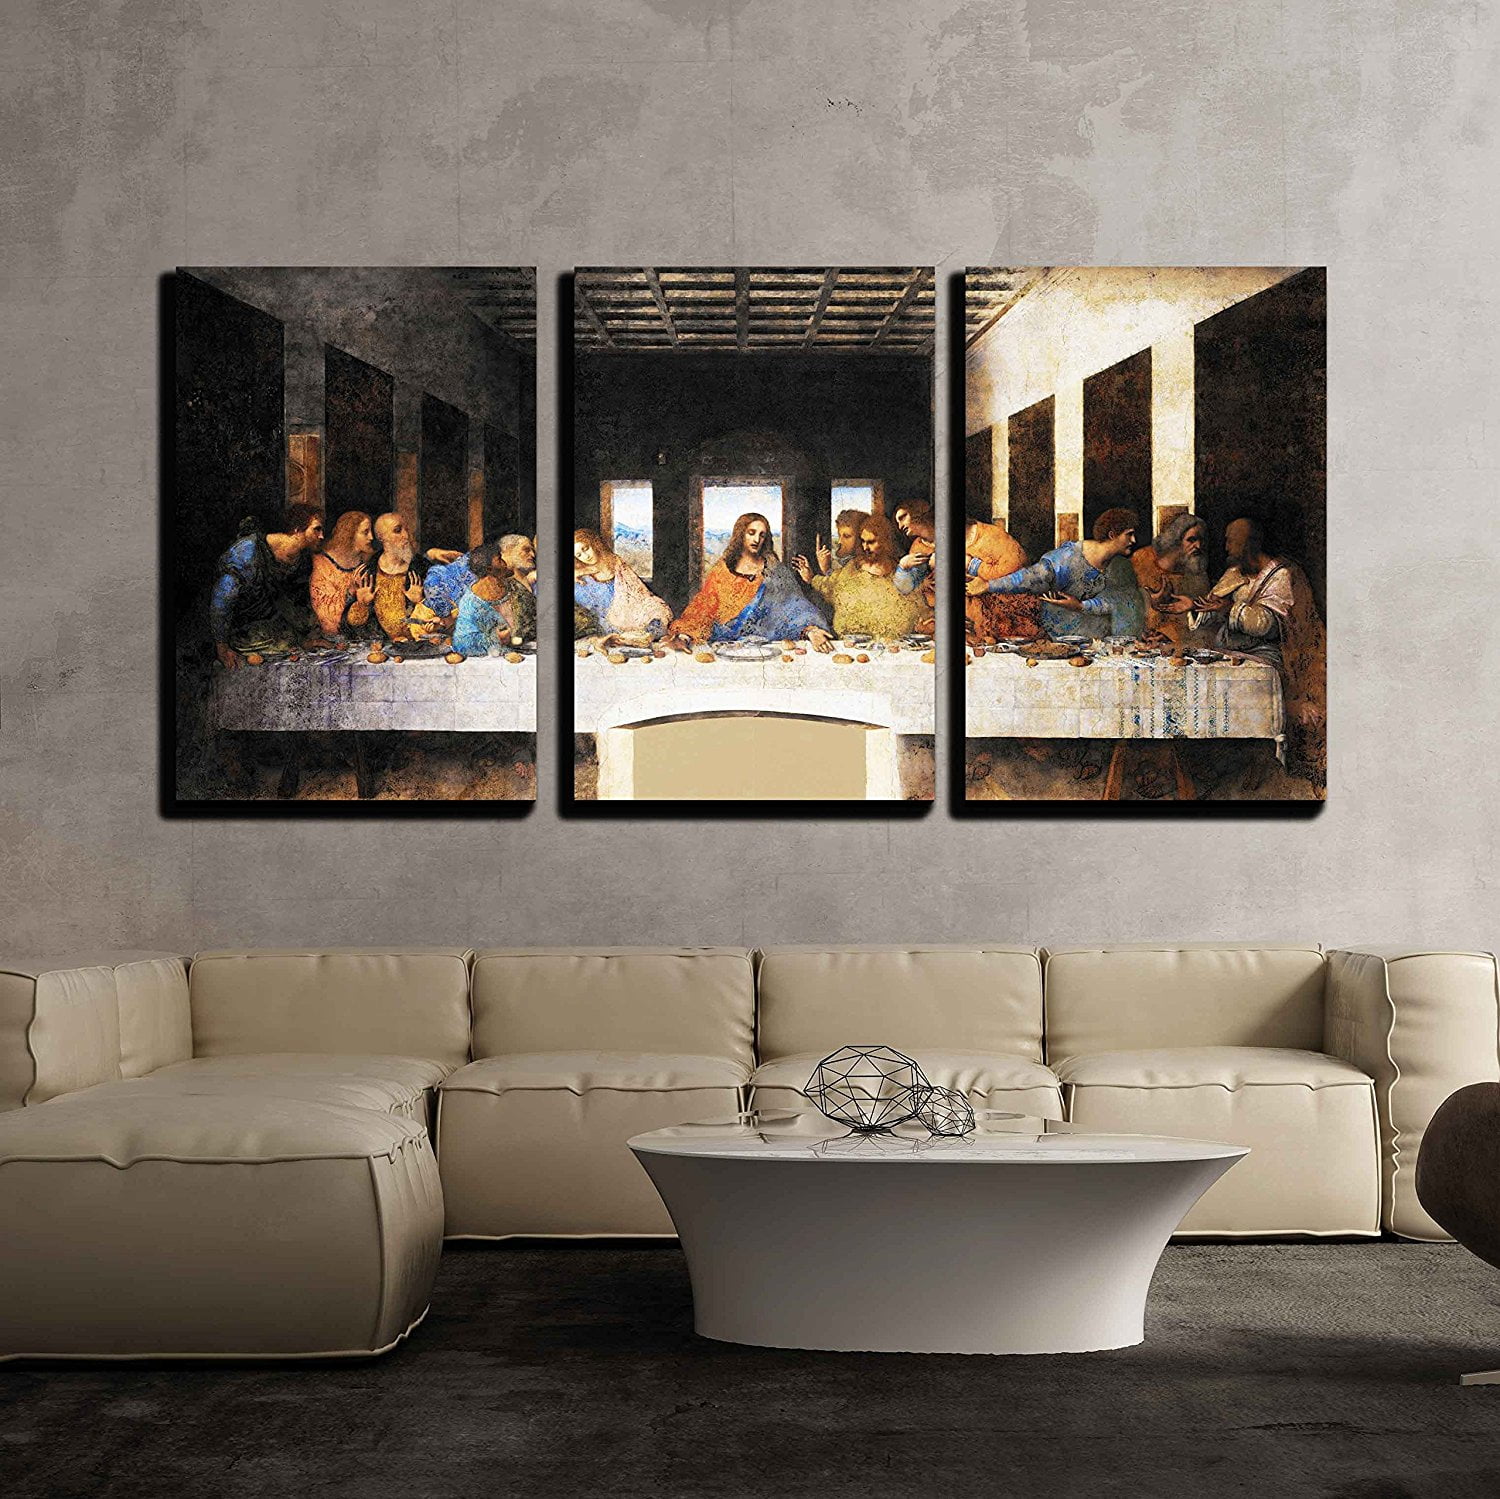 The Last Supper | Last Supper Wall Decor for Lent, Vietnam | Ubuy